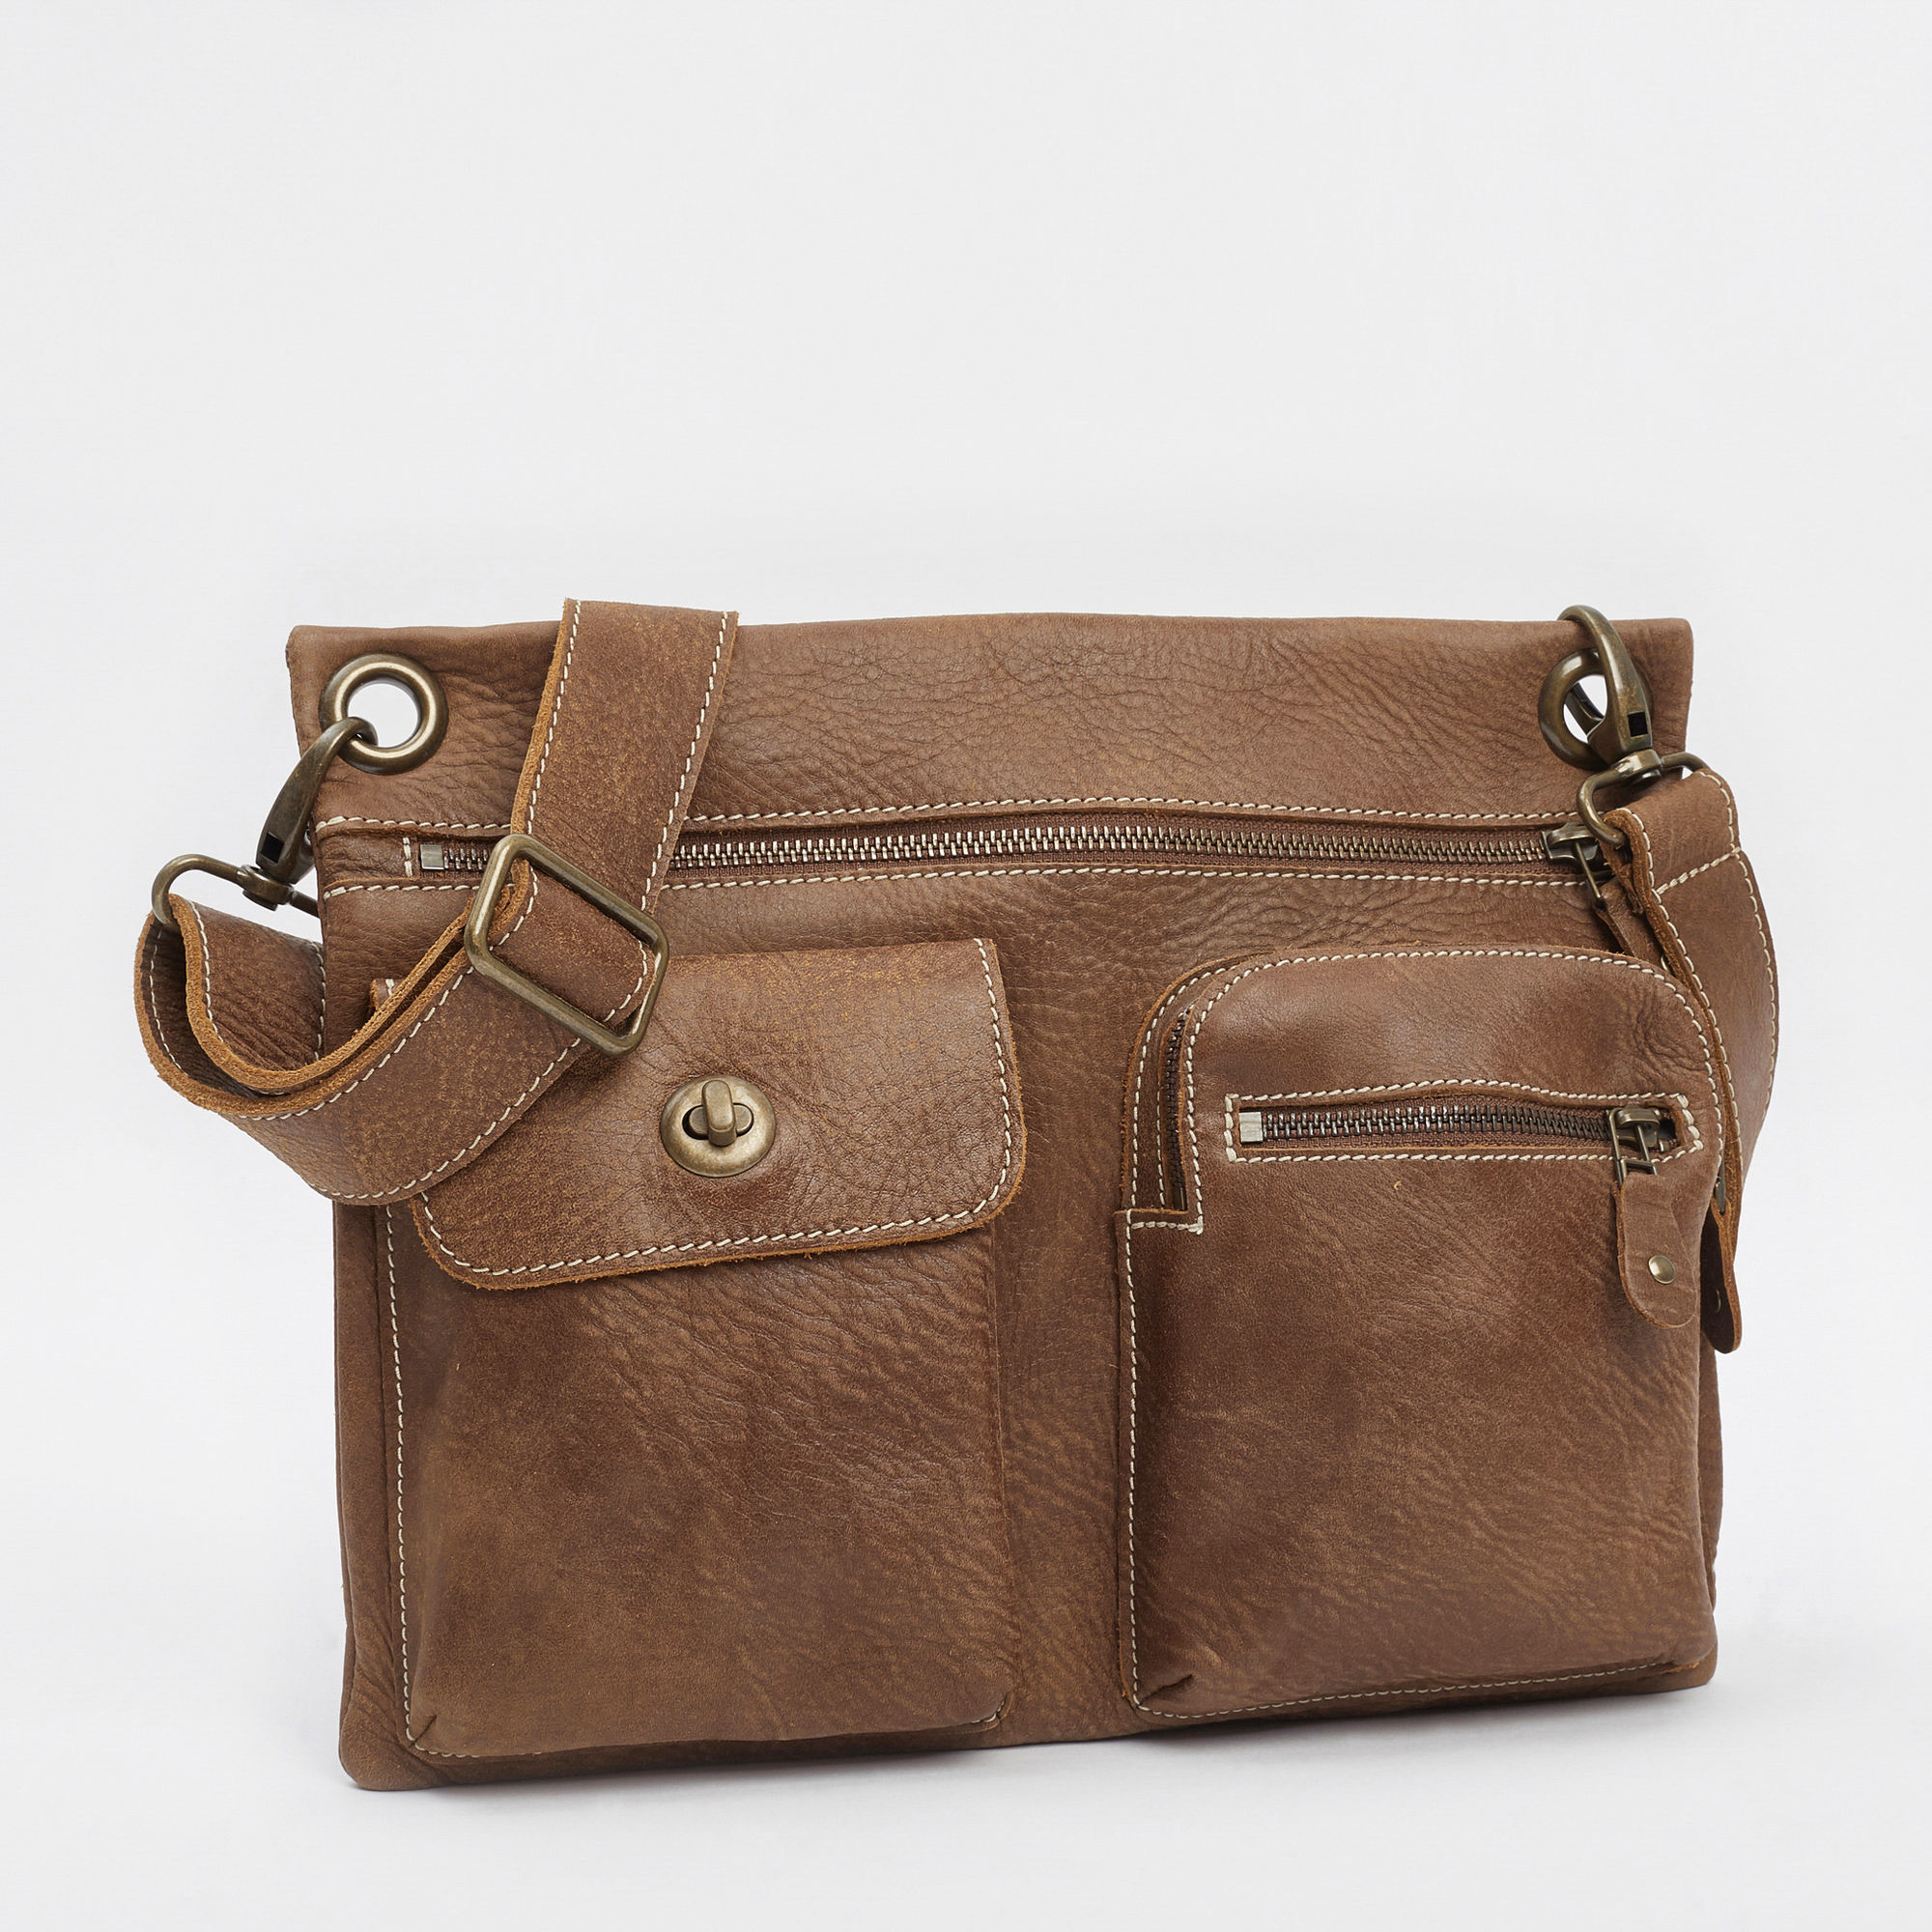 Roots Satchel Tribe Bag - THE BRIGHT SPOT